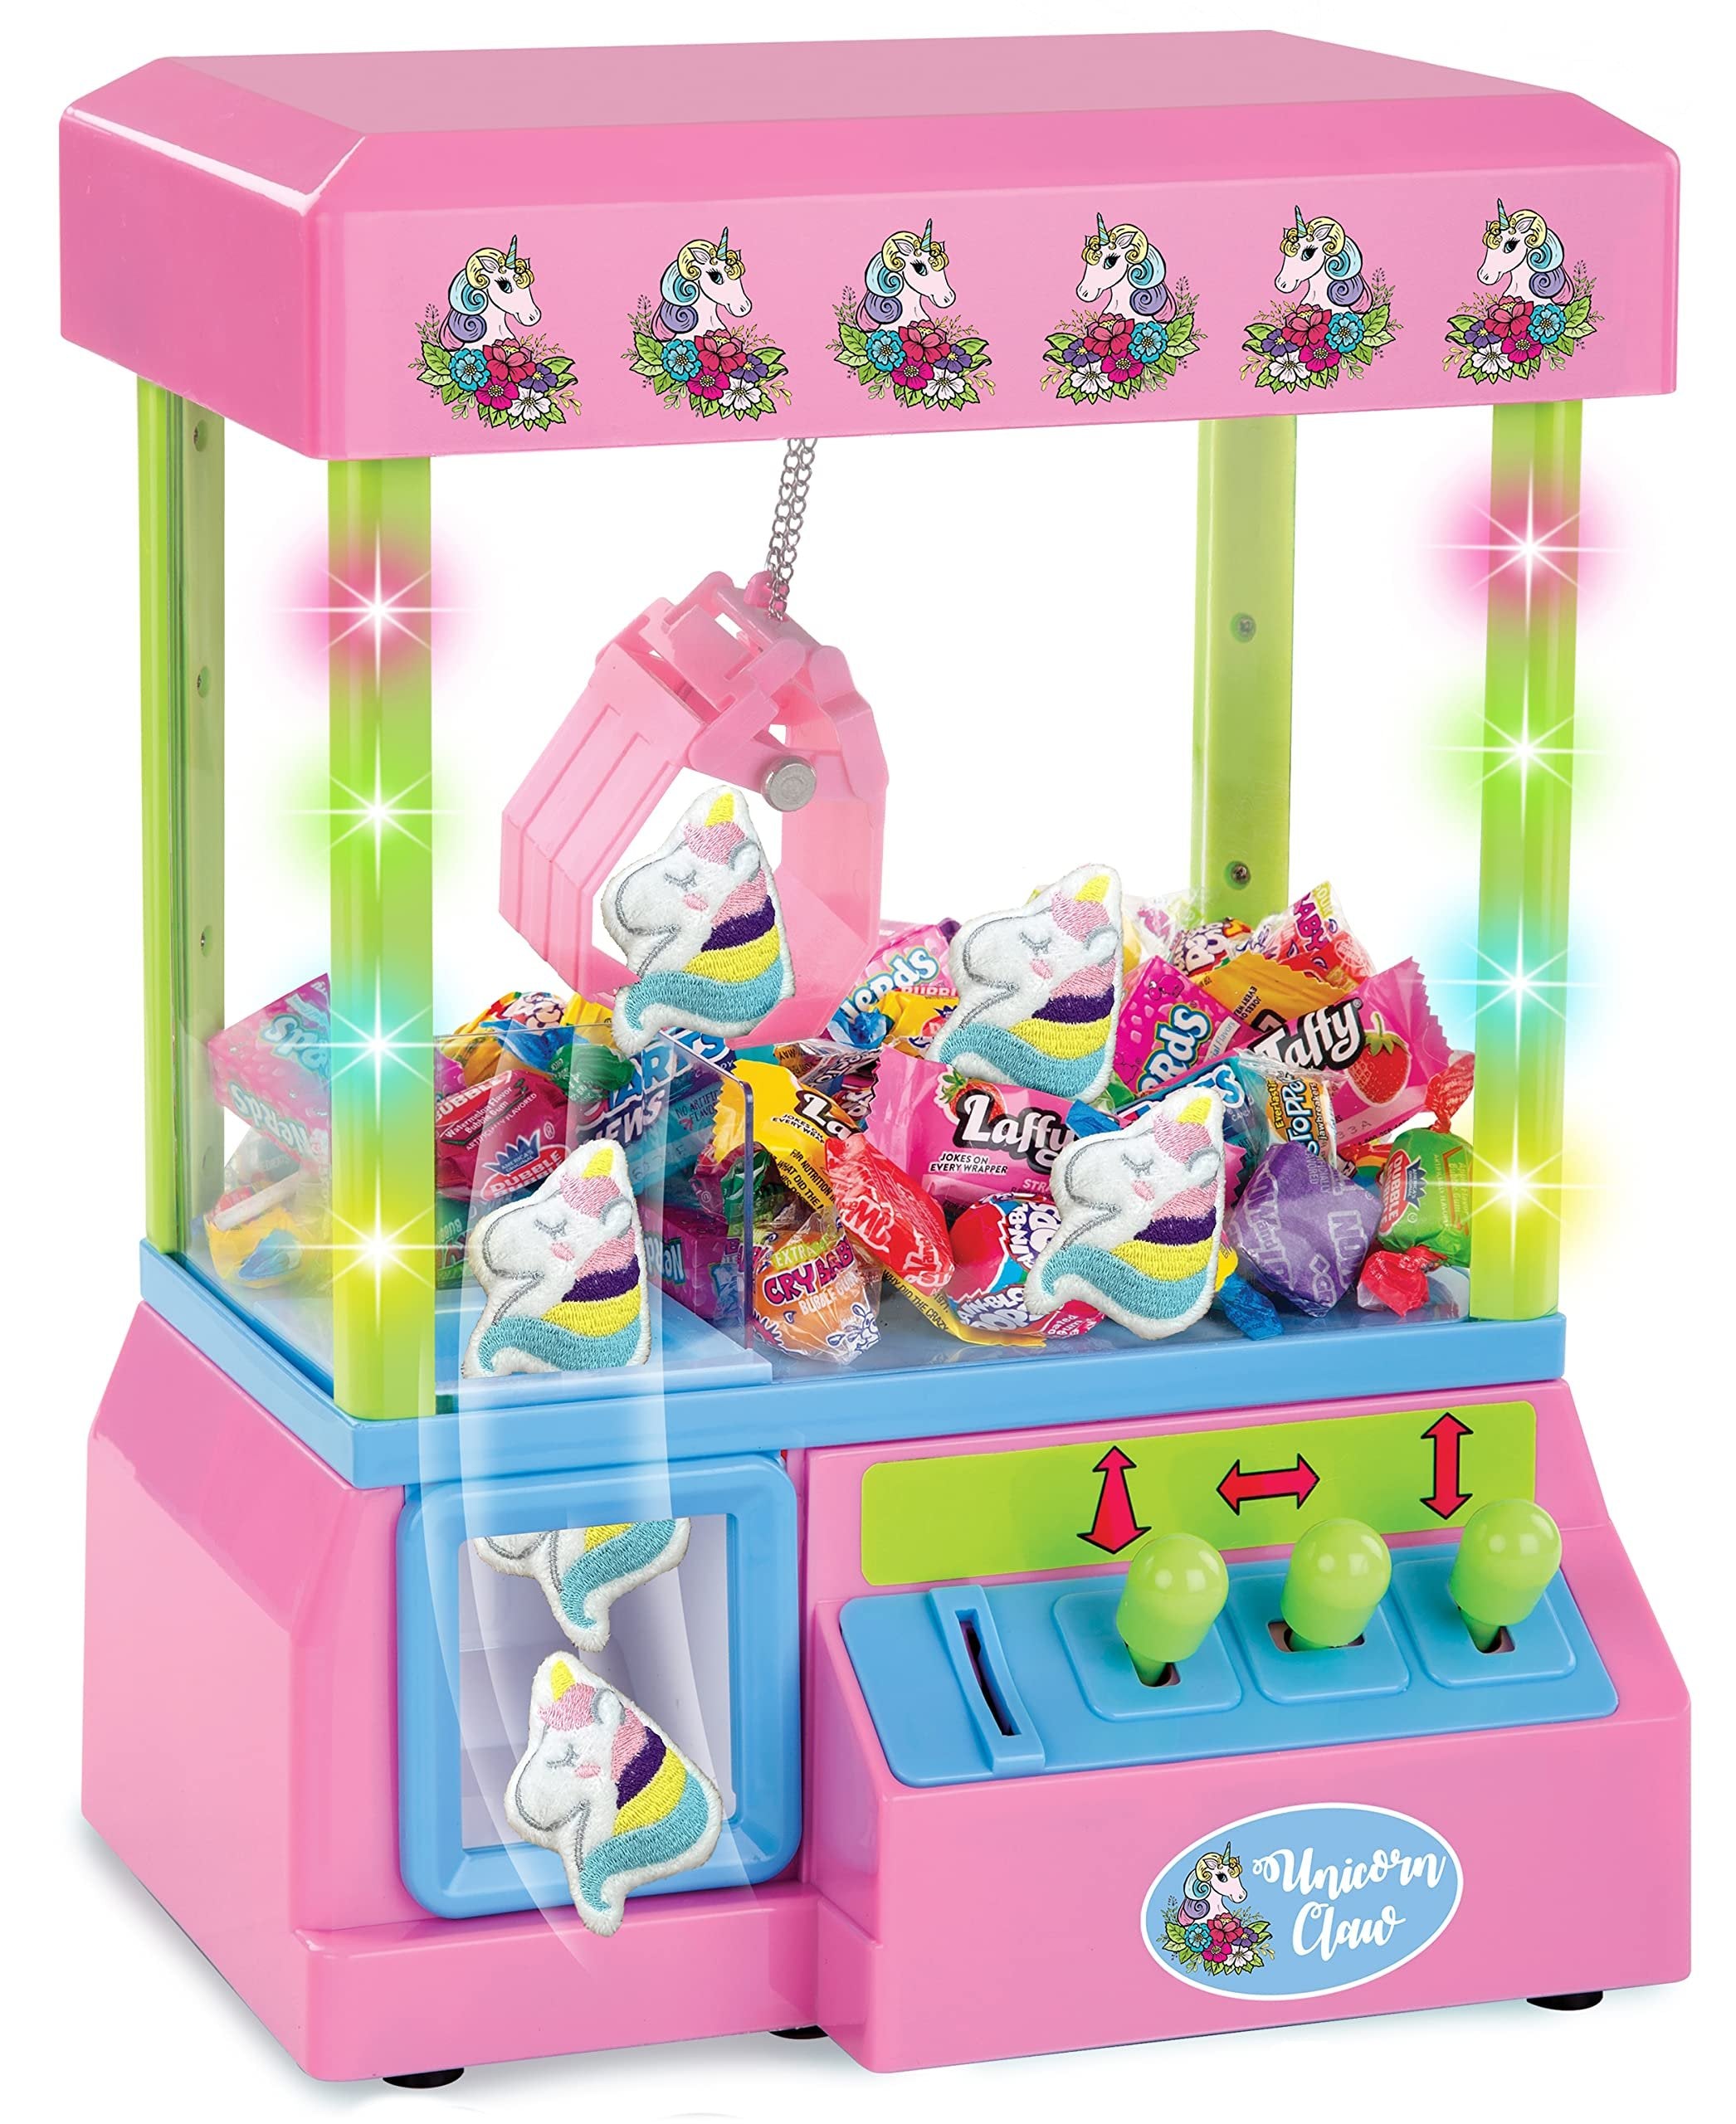 Bundaloo Unicorn Claw Machine Arcade Game with Lights and Sound, Candy Grabber & Prize Dispenser Vending Toy for Kids with 3 Plush Mini Unicorn Prizes